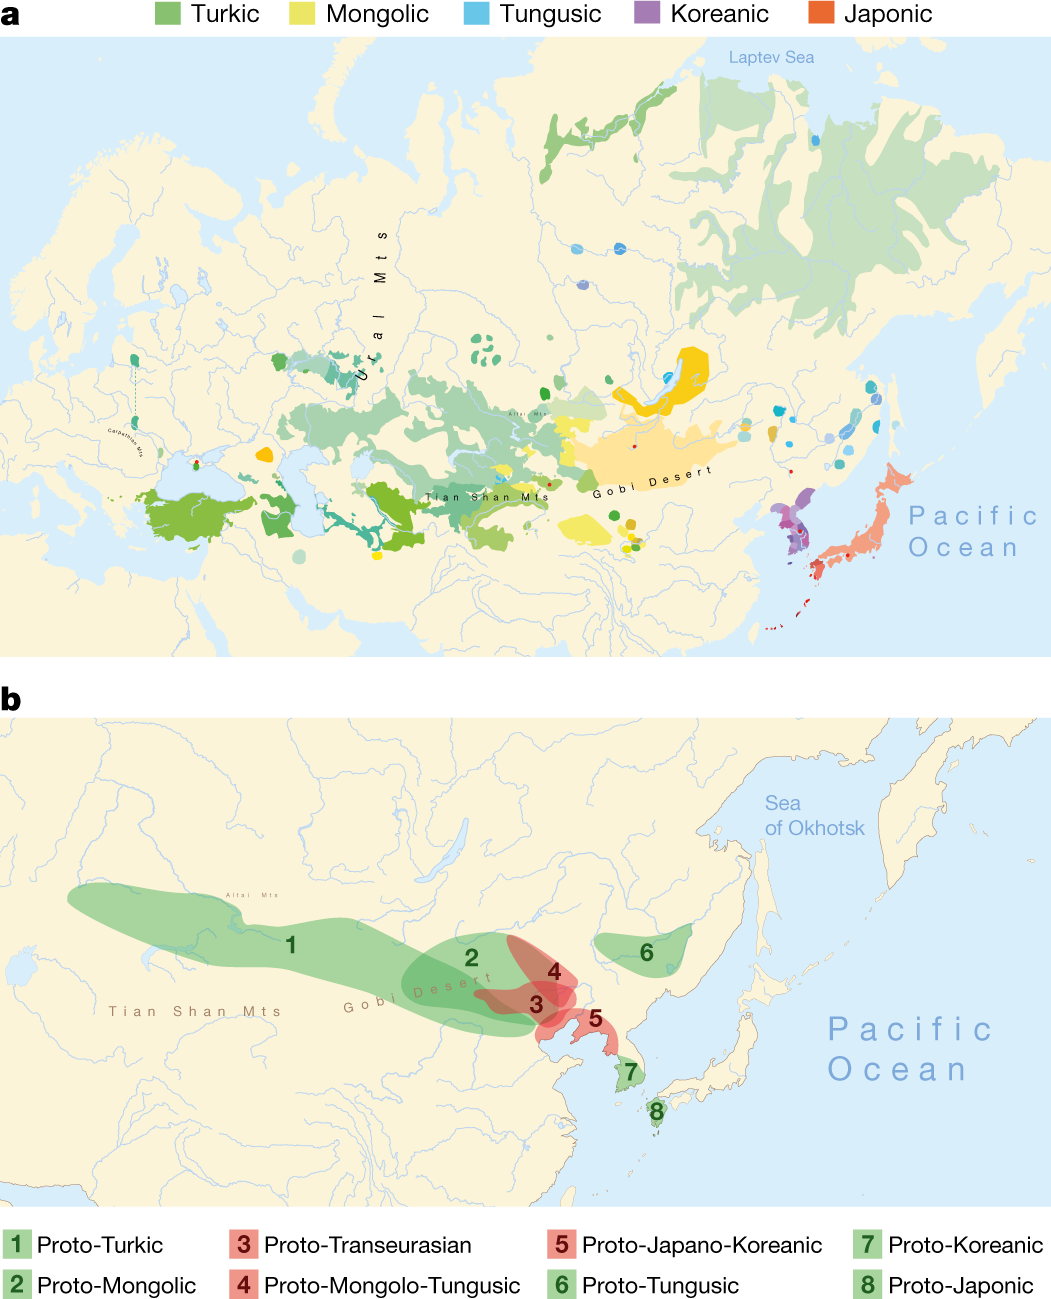 Triangulation supports agricultural spread of the Transeurasian languages |  Nature